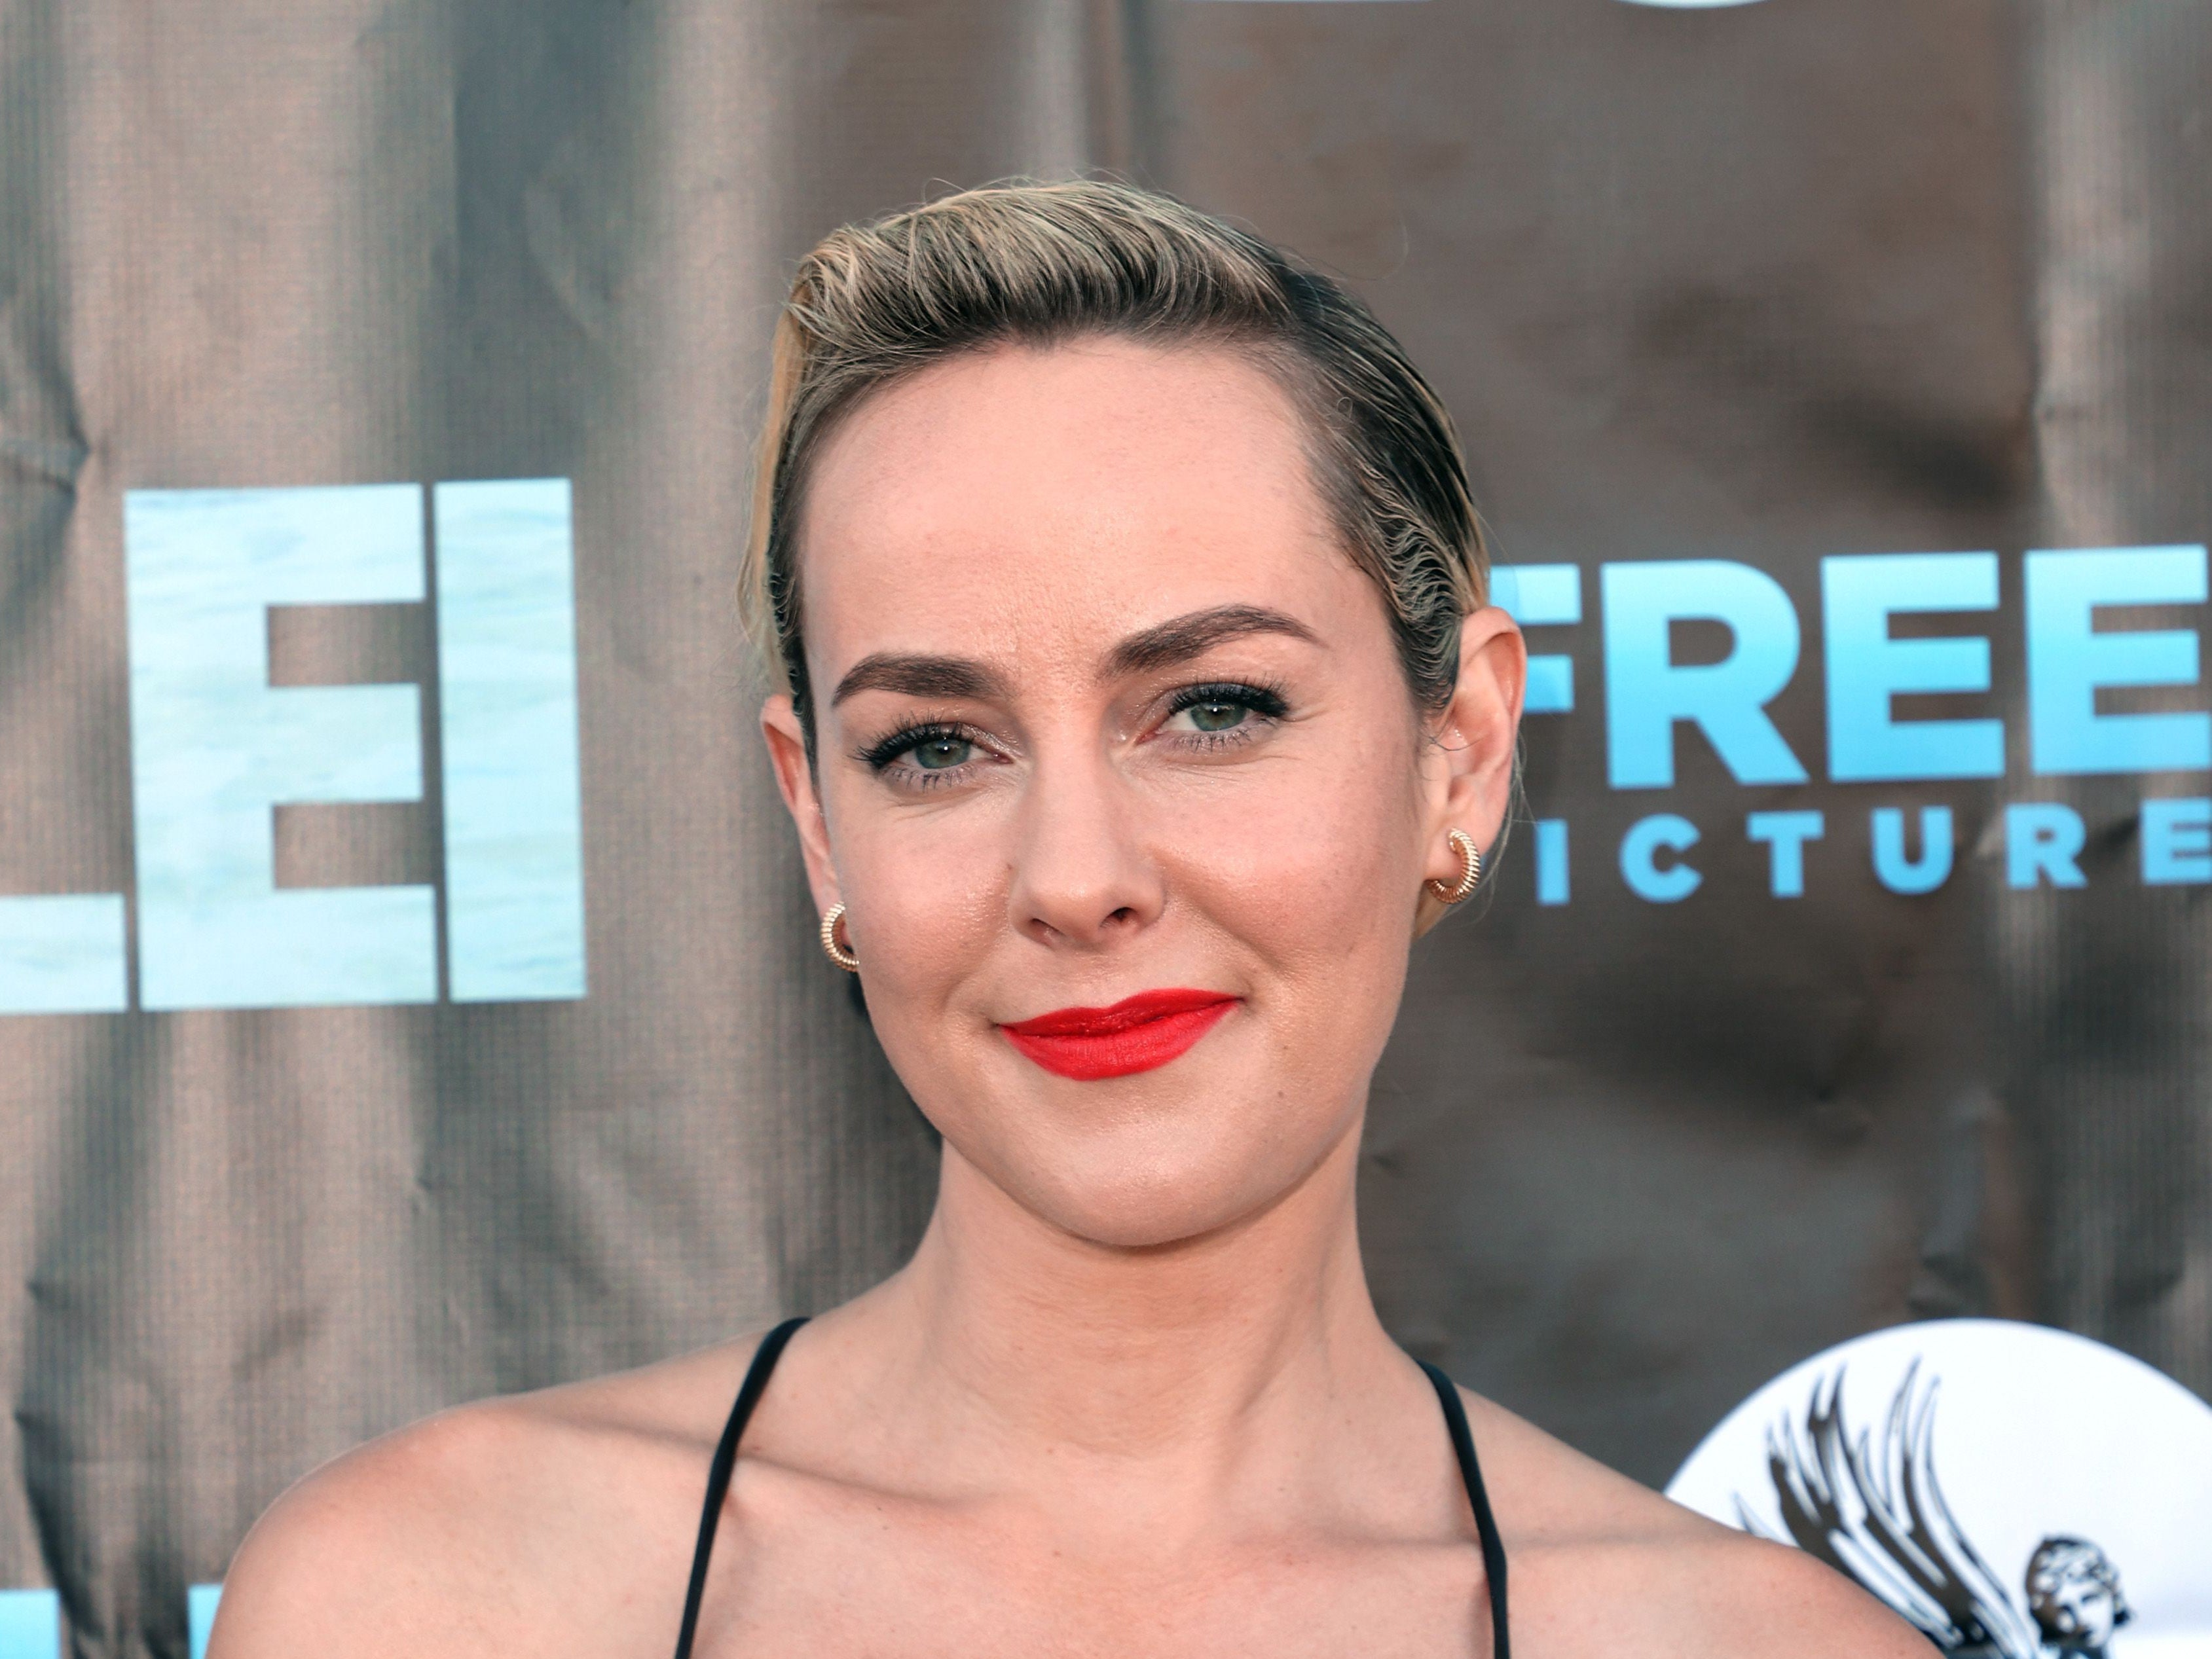 Jena Malone attends the premiere of Vertical’s “Lorelei” at Laemmle Royal on July 28, 2021 in Los Angeles, California.